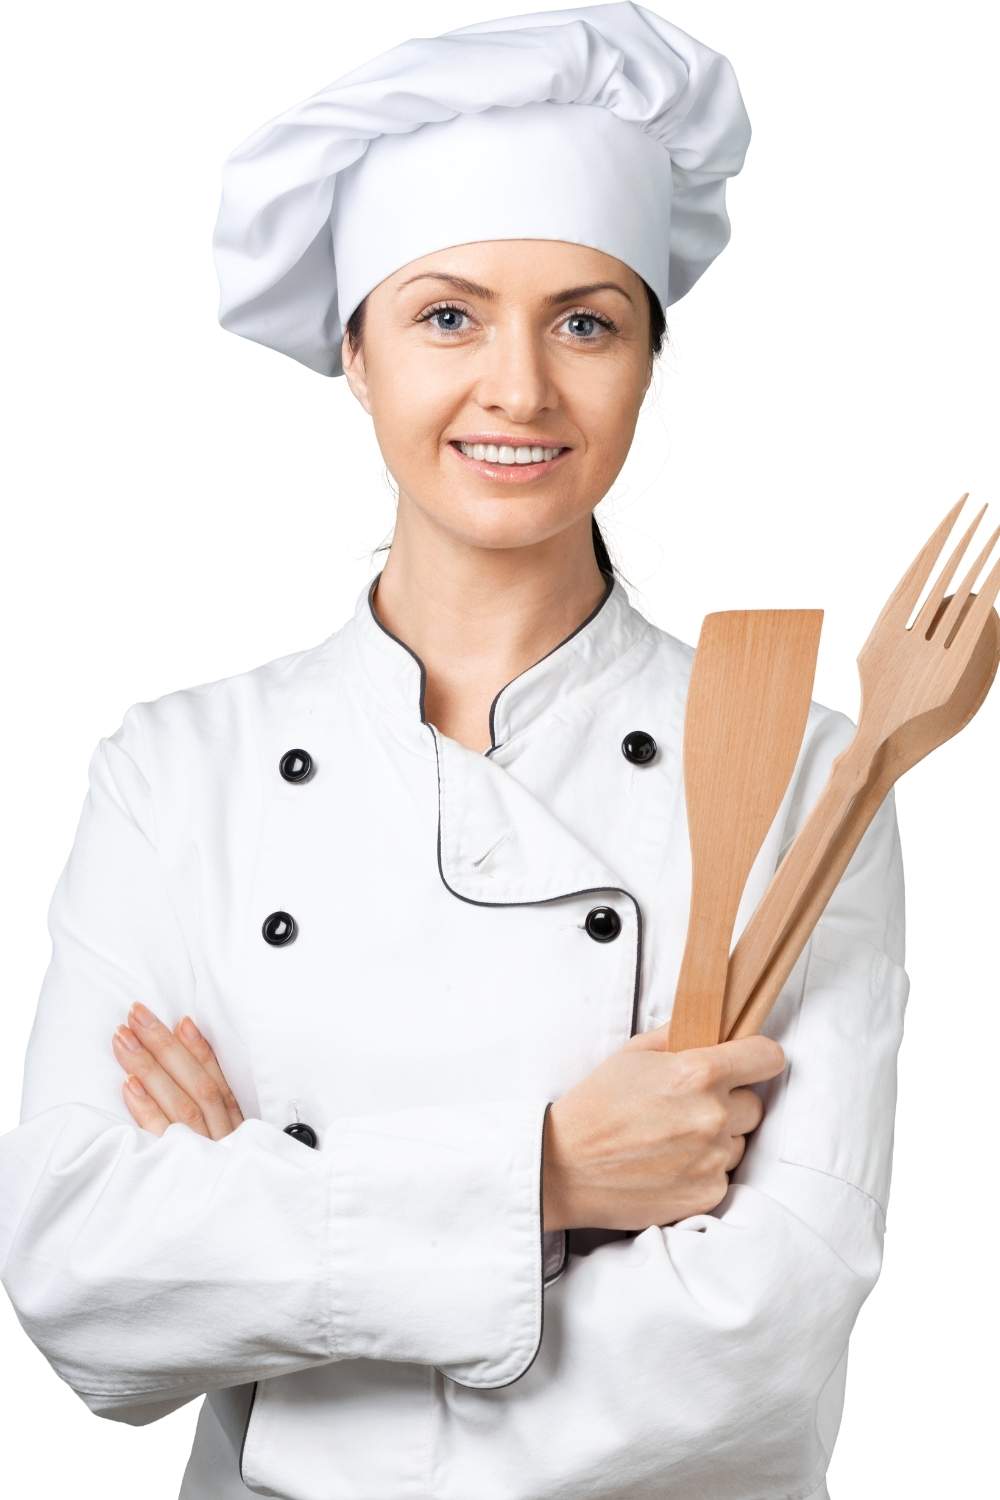 Woman wears chef hat and white coat, while holding wooden utensils.